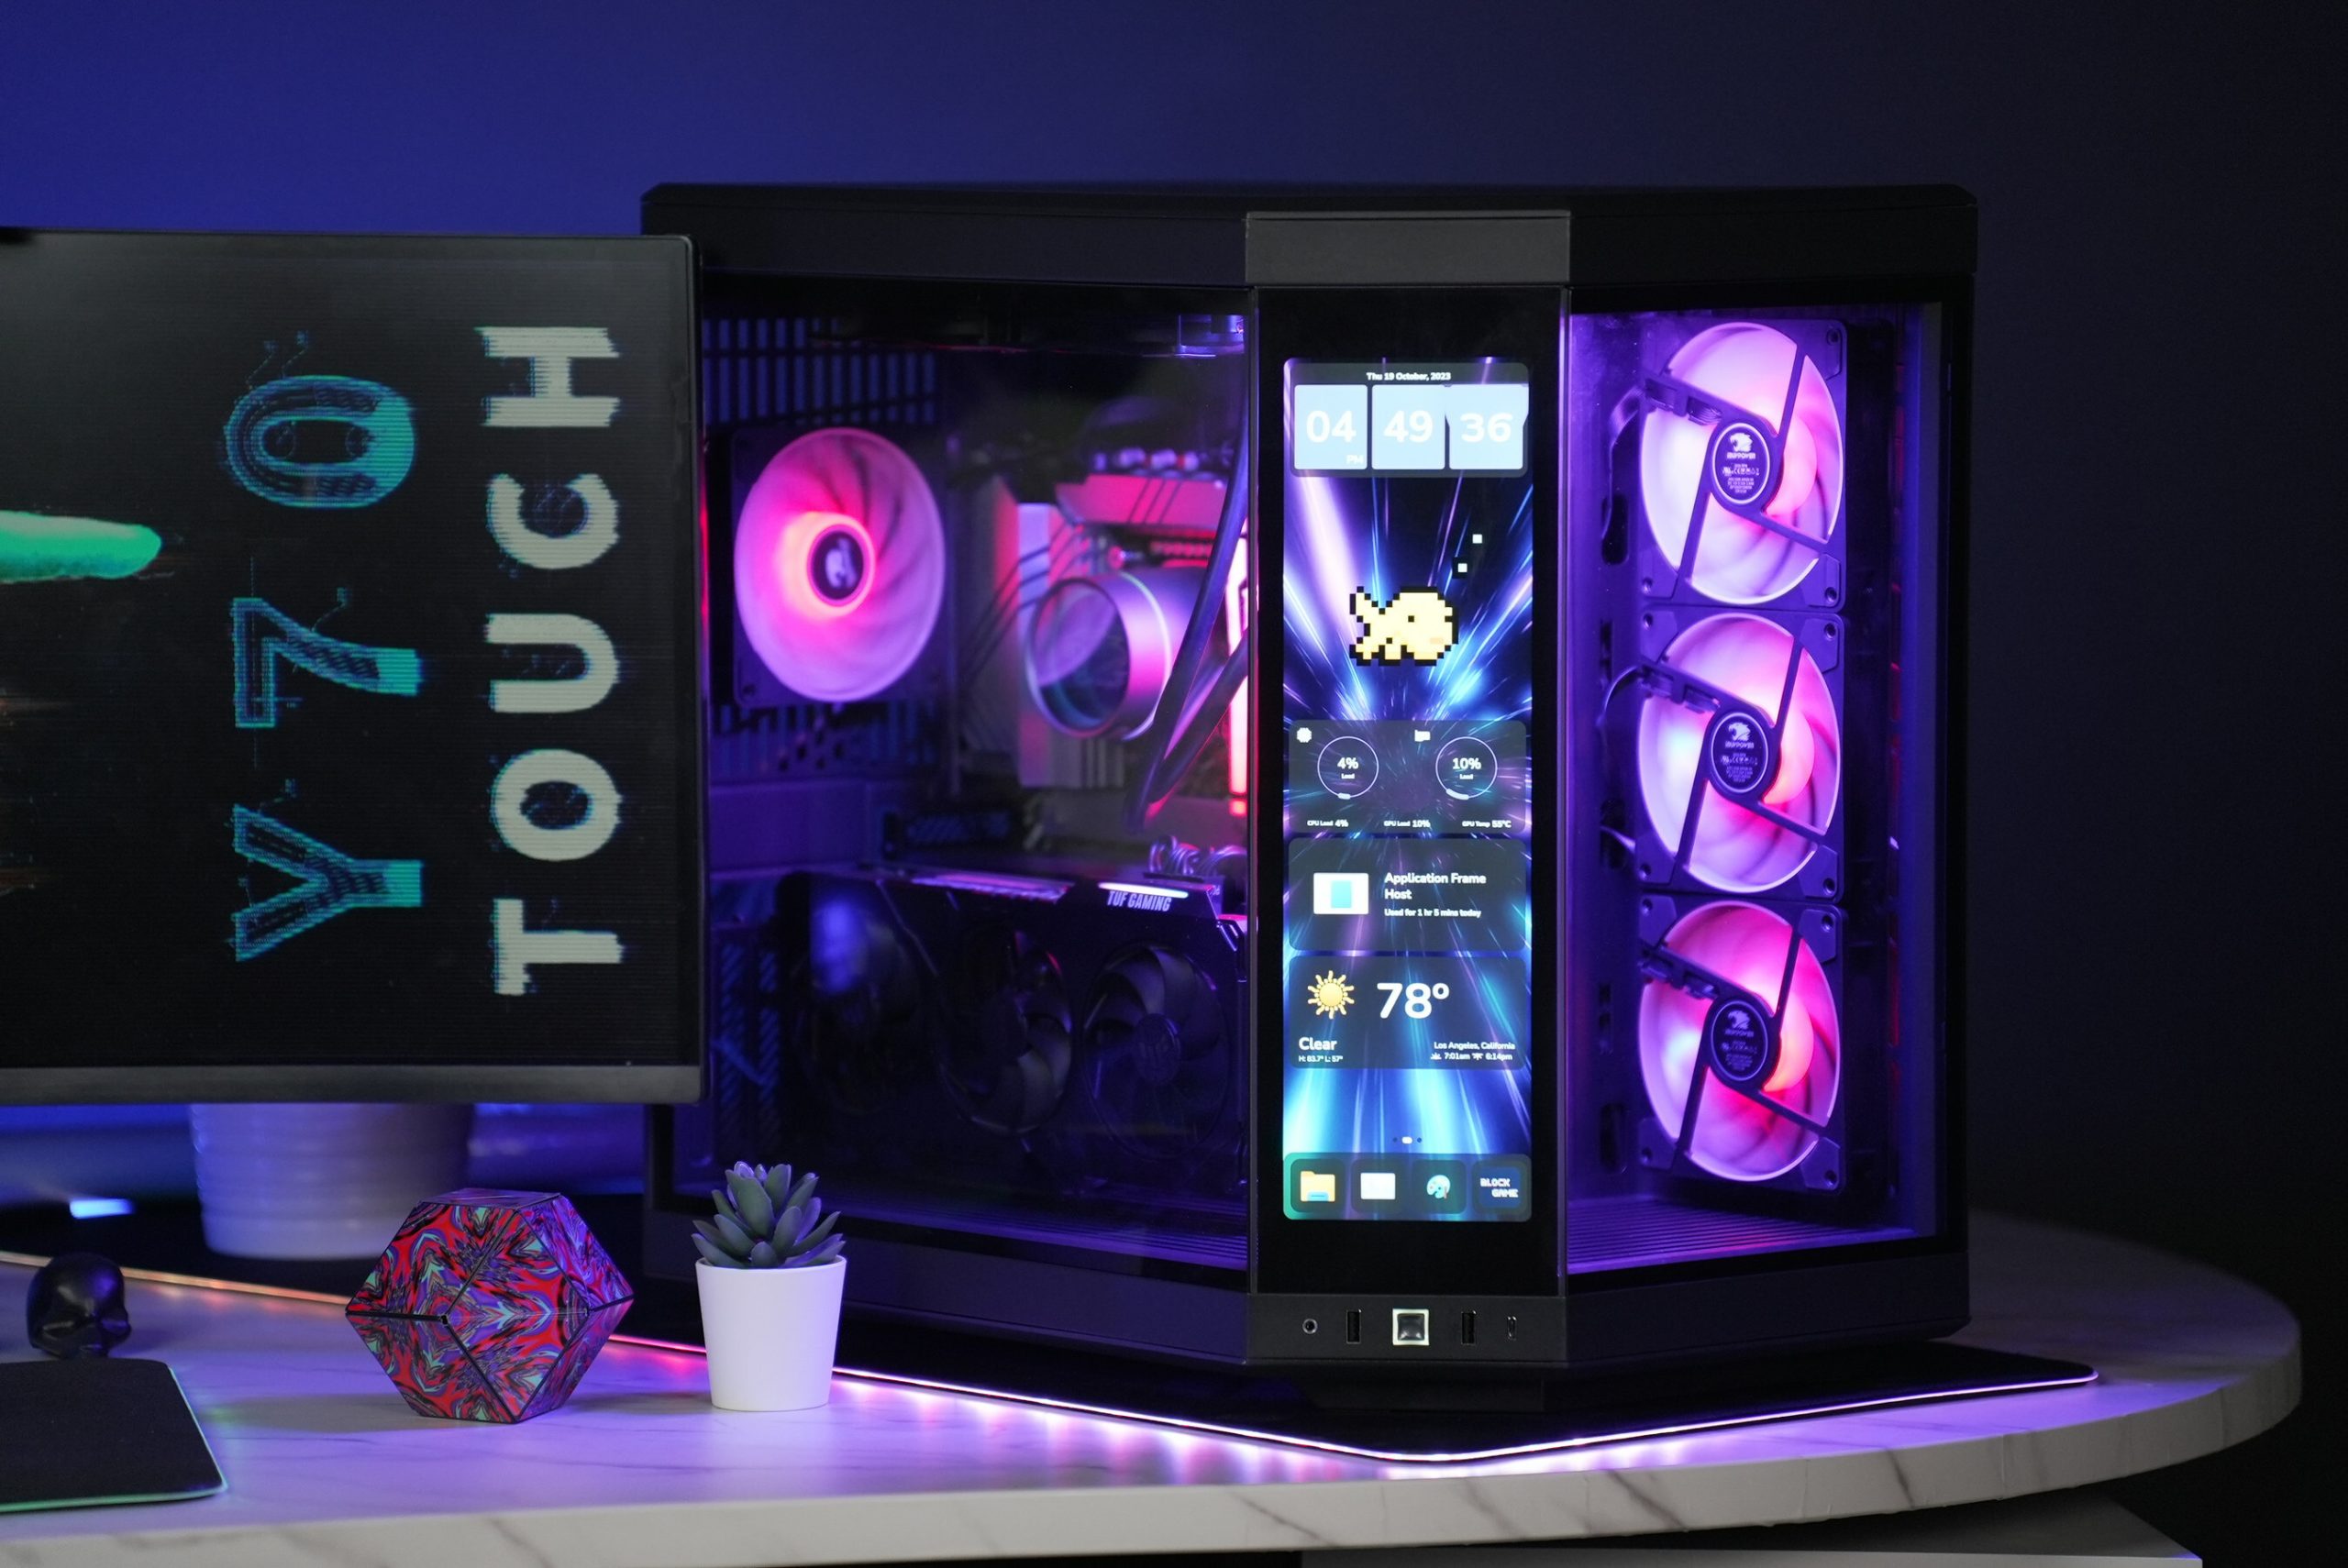 The sanrio pc got an upgrade…to the @Hyte Y70 Touch 👀🩷 #gamingpc #pc, hyte  y70